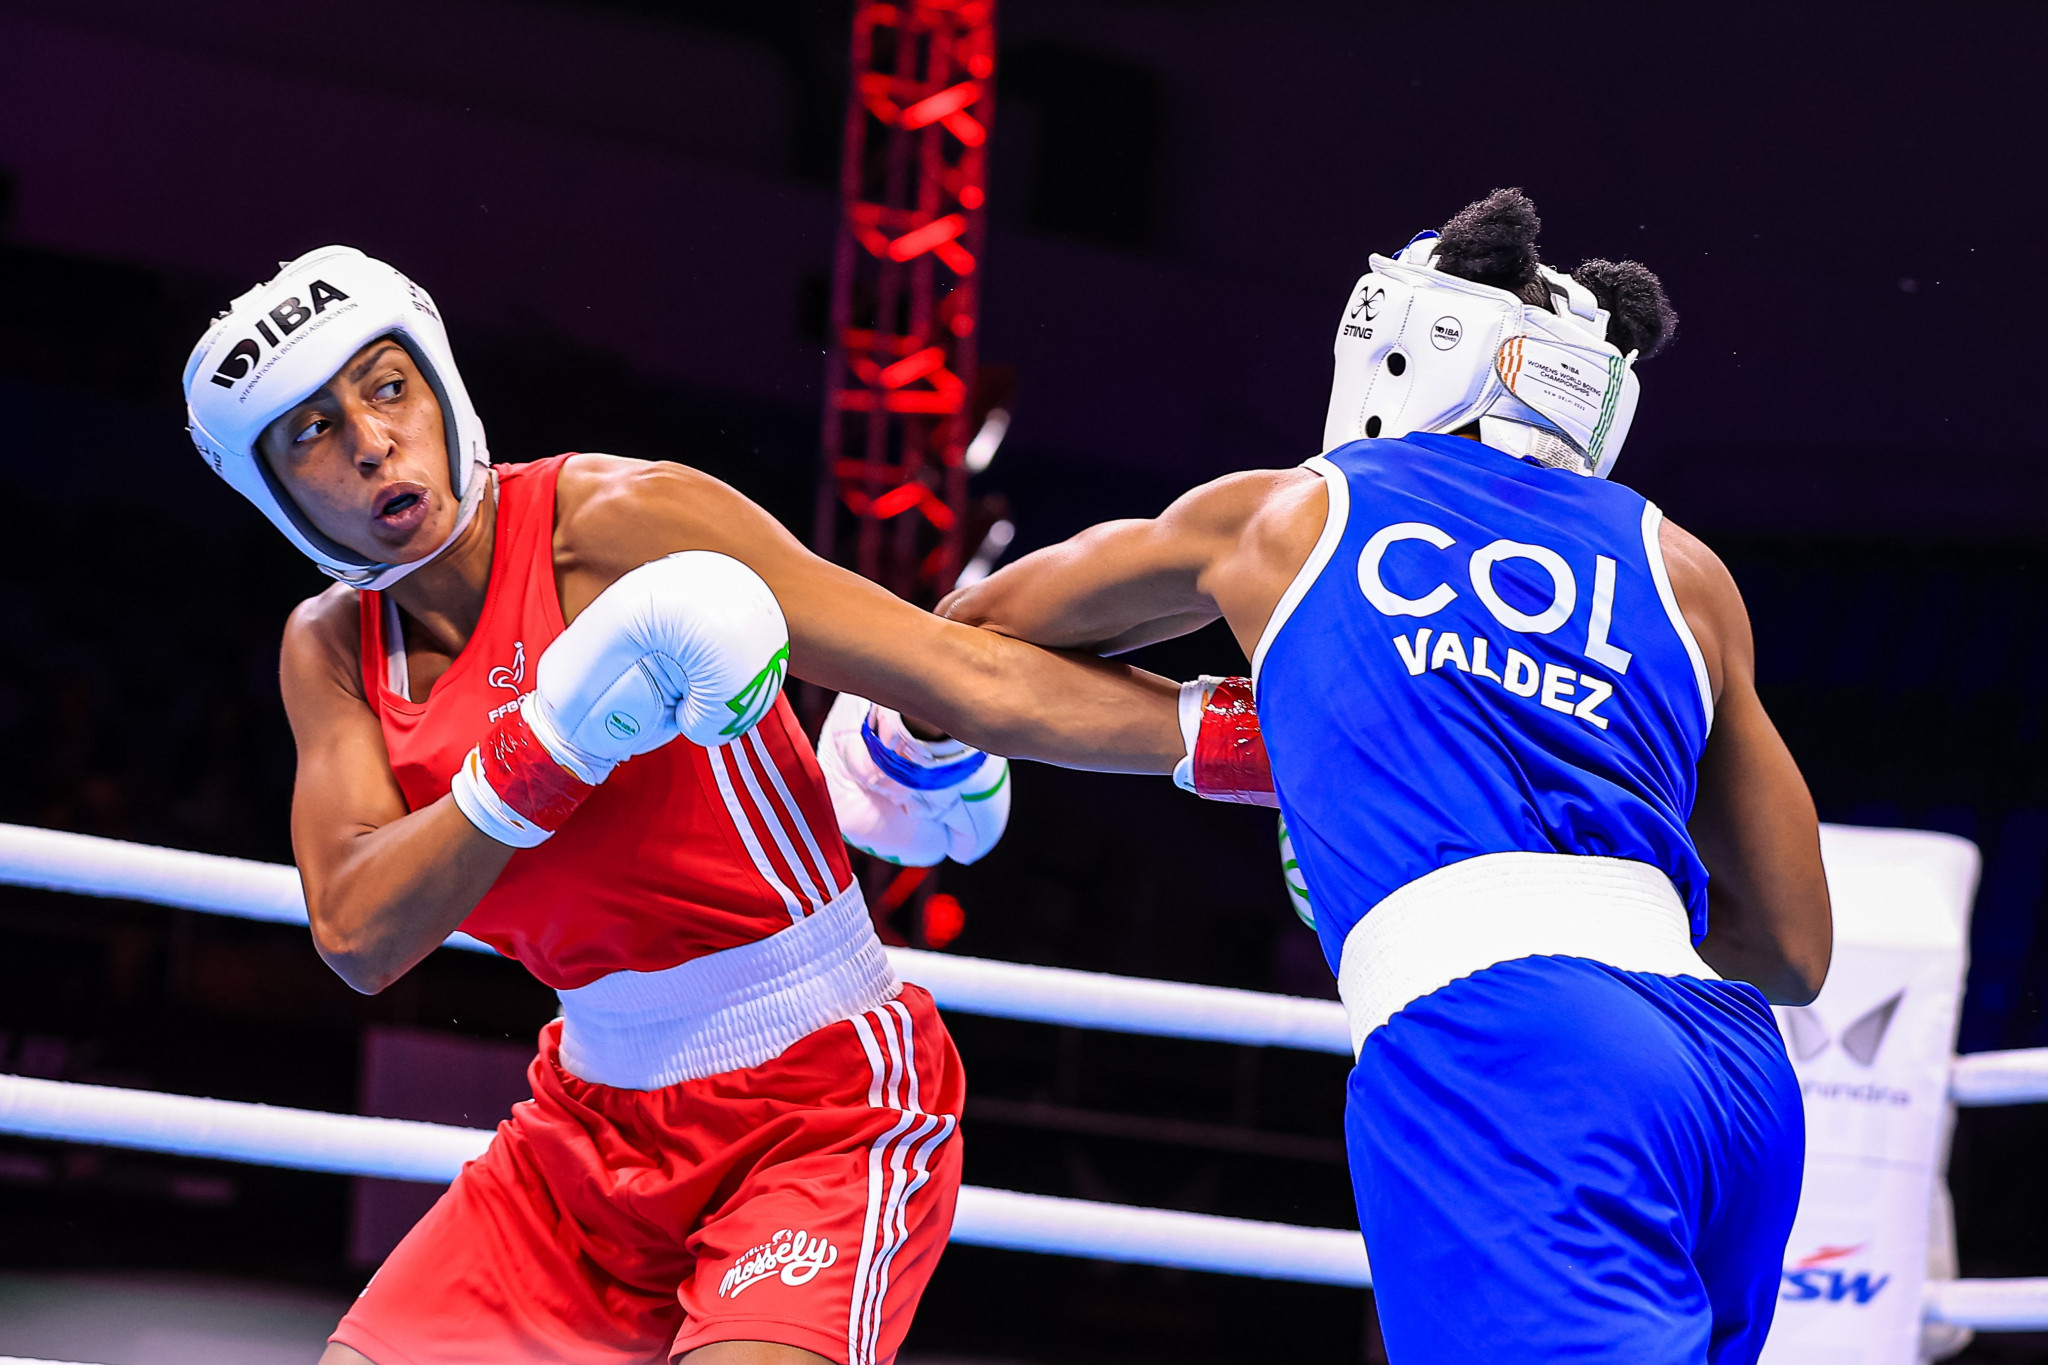 French star Estelle Mossely was beaten by Colombia’s Angie Paola Valdés in the round of 16 in New Delhi ©IBA